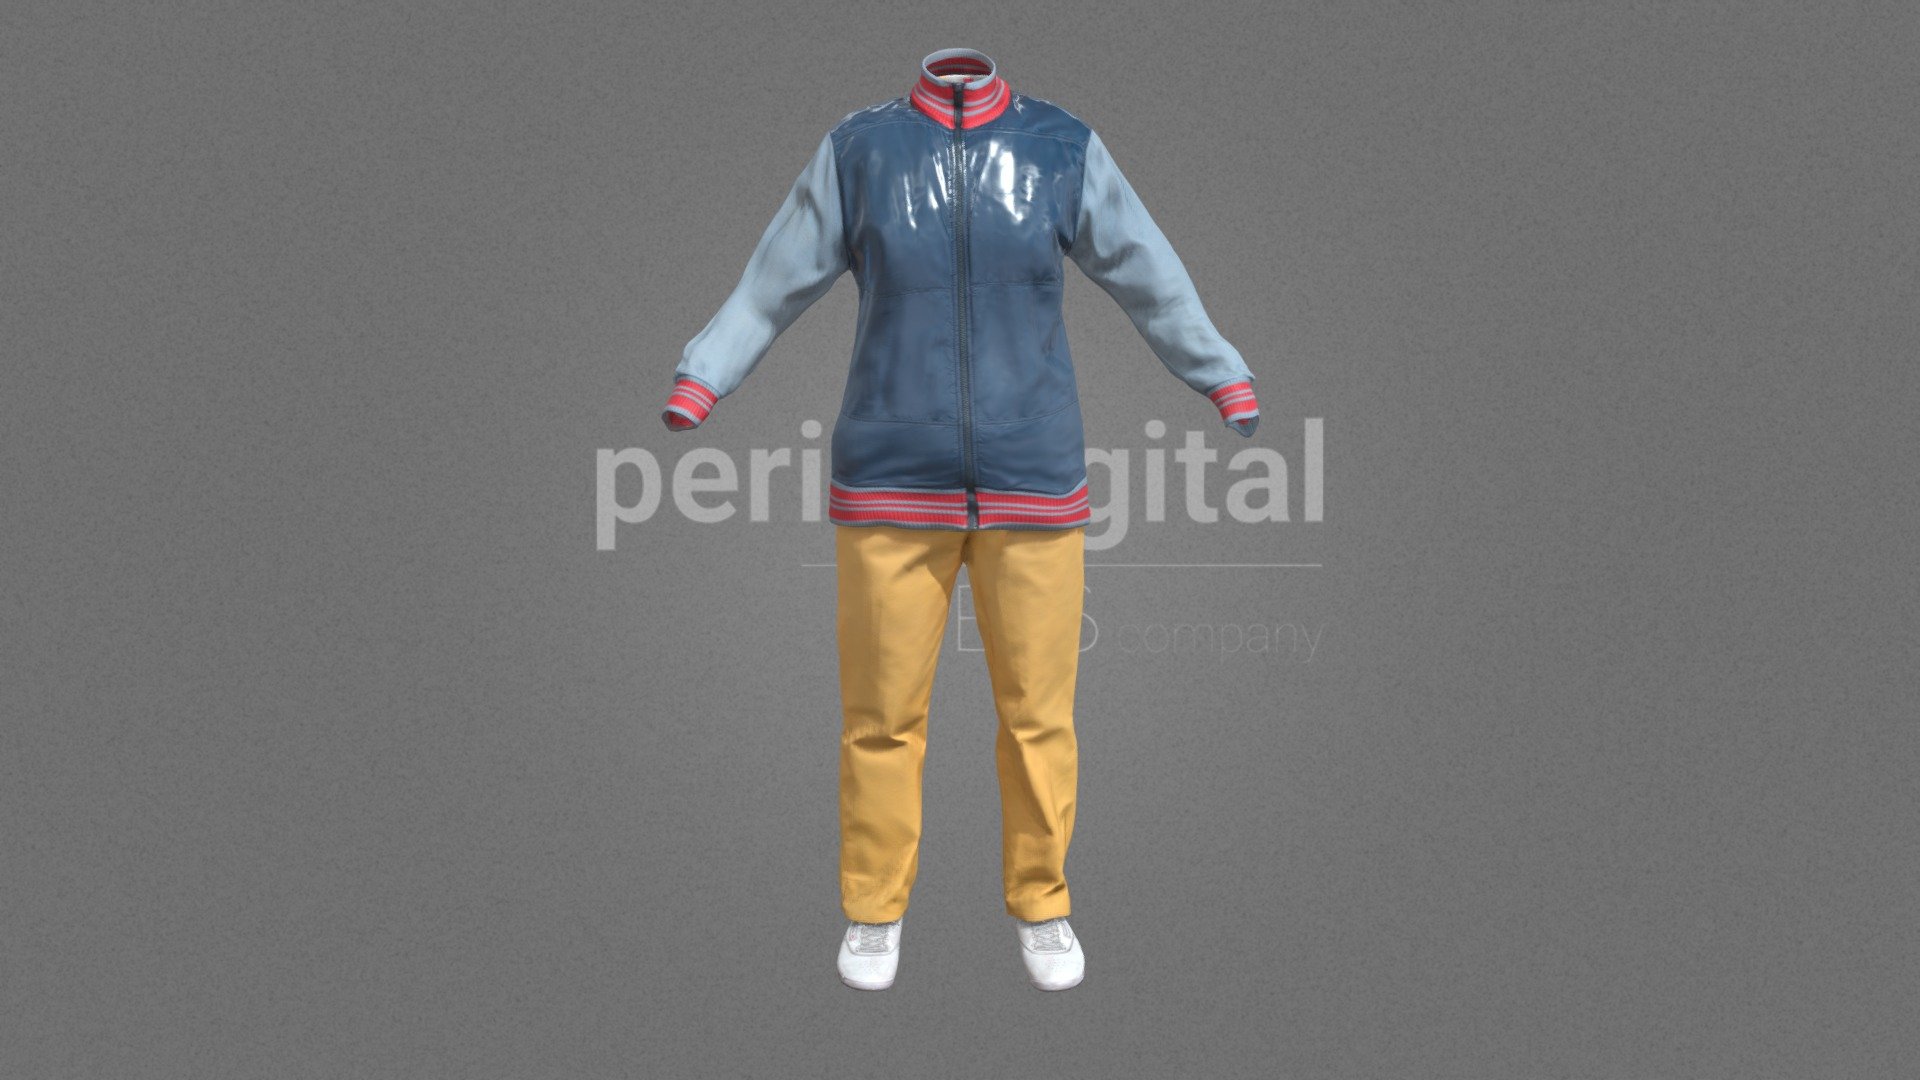 Blue jacket with light blue sleeves and red necj and cuffs, white short sleeved shirt with prints, yellow trousers and white shoes

PERIS DIGITAL HIGH QUALITY 3D CLOTHING They are optimized for use in medium/high poly 3D scenes and optimized for rendering. We do not include characters, but they are positioned for you to include and adjust your own character. They have a LOW Poly Mesh (LODRIG) inside the Blender file (included in the AdditionalFiles), which you can use for vertex weighting or cloth simulation and thus, make the transfer of vertices or property masks from the LOW to the HIGH model. We have included in Additional Files, the texture maps in high resolution, as well as the Displacement maps in high resolution too, so you can perform extreme point of view with your 3D cameras. With the Blender file (included in AdditionalFiles) you will be able to edit any aspect of the set . Enjoy it!

Web: https://peris.digital/ - 80s Fashion Series - Woman 26 - 3D model by Peris Digital (@perisdigital) 3d model